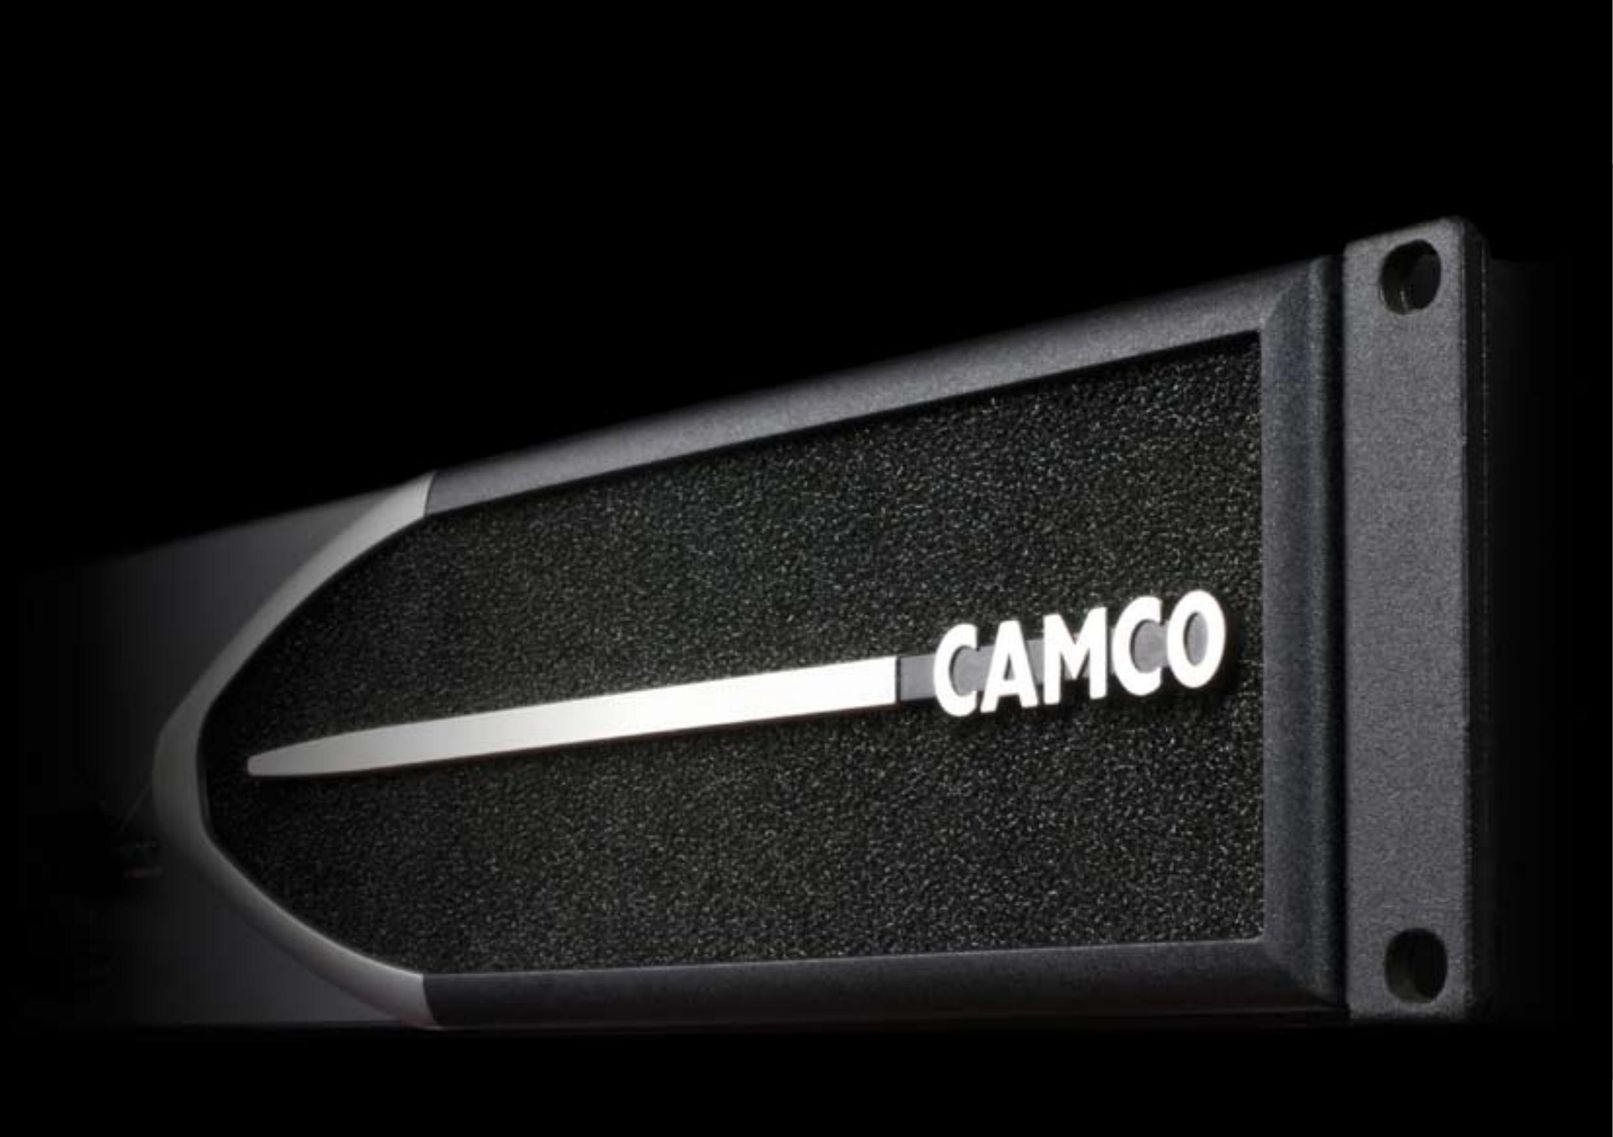 Camco 32 dB Stereo Amplifier User Manual